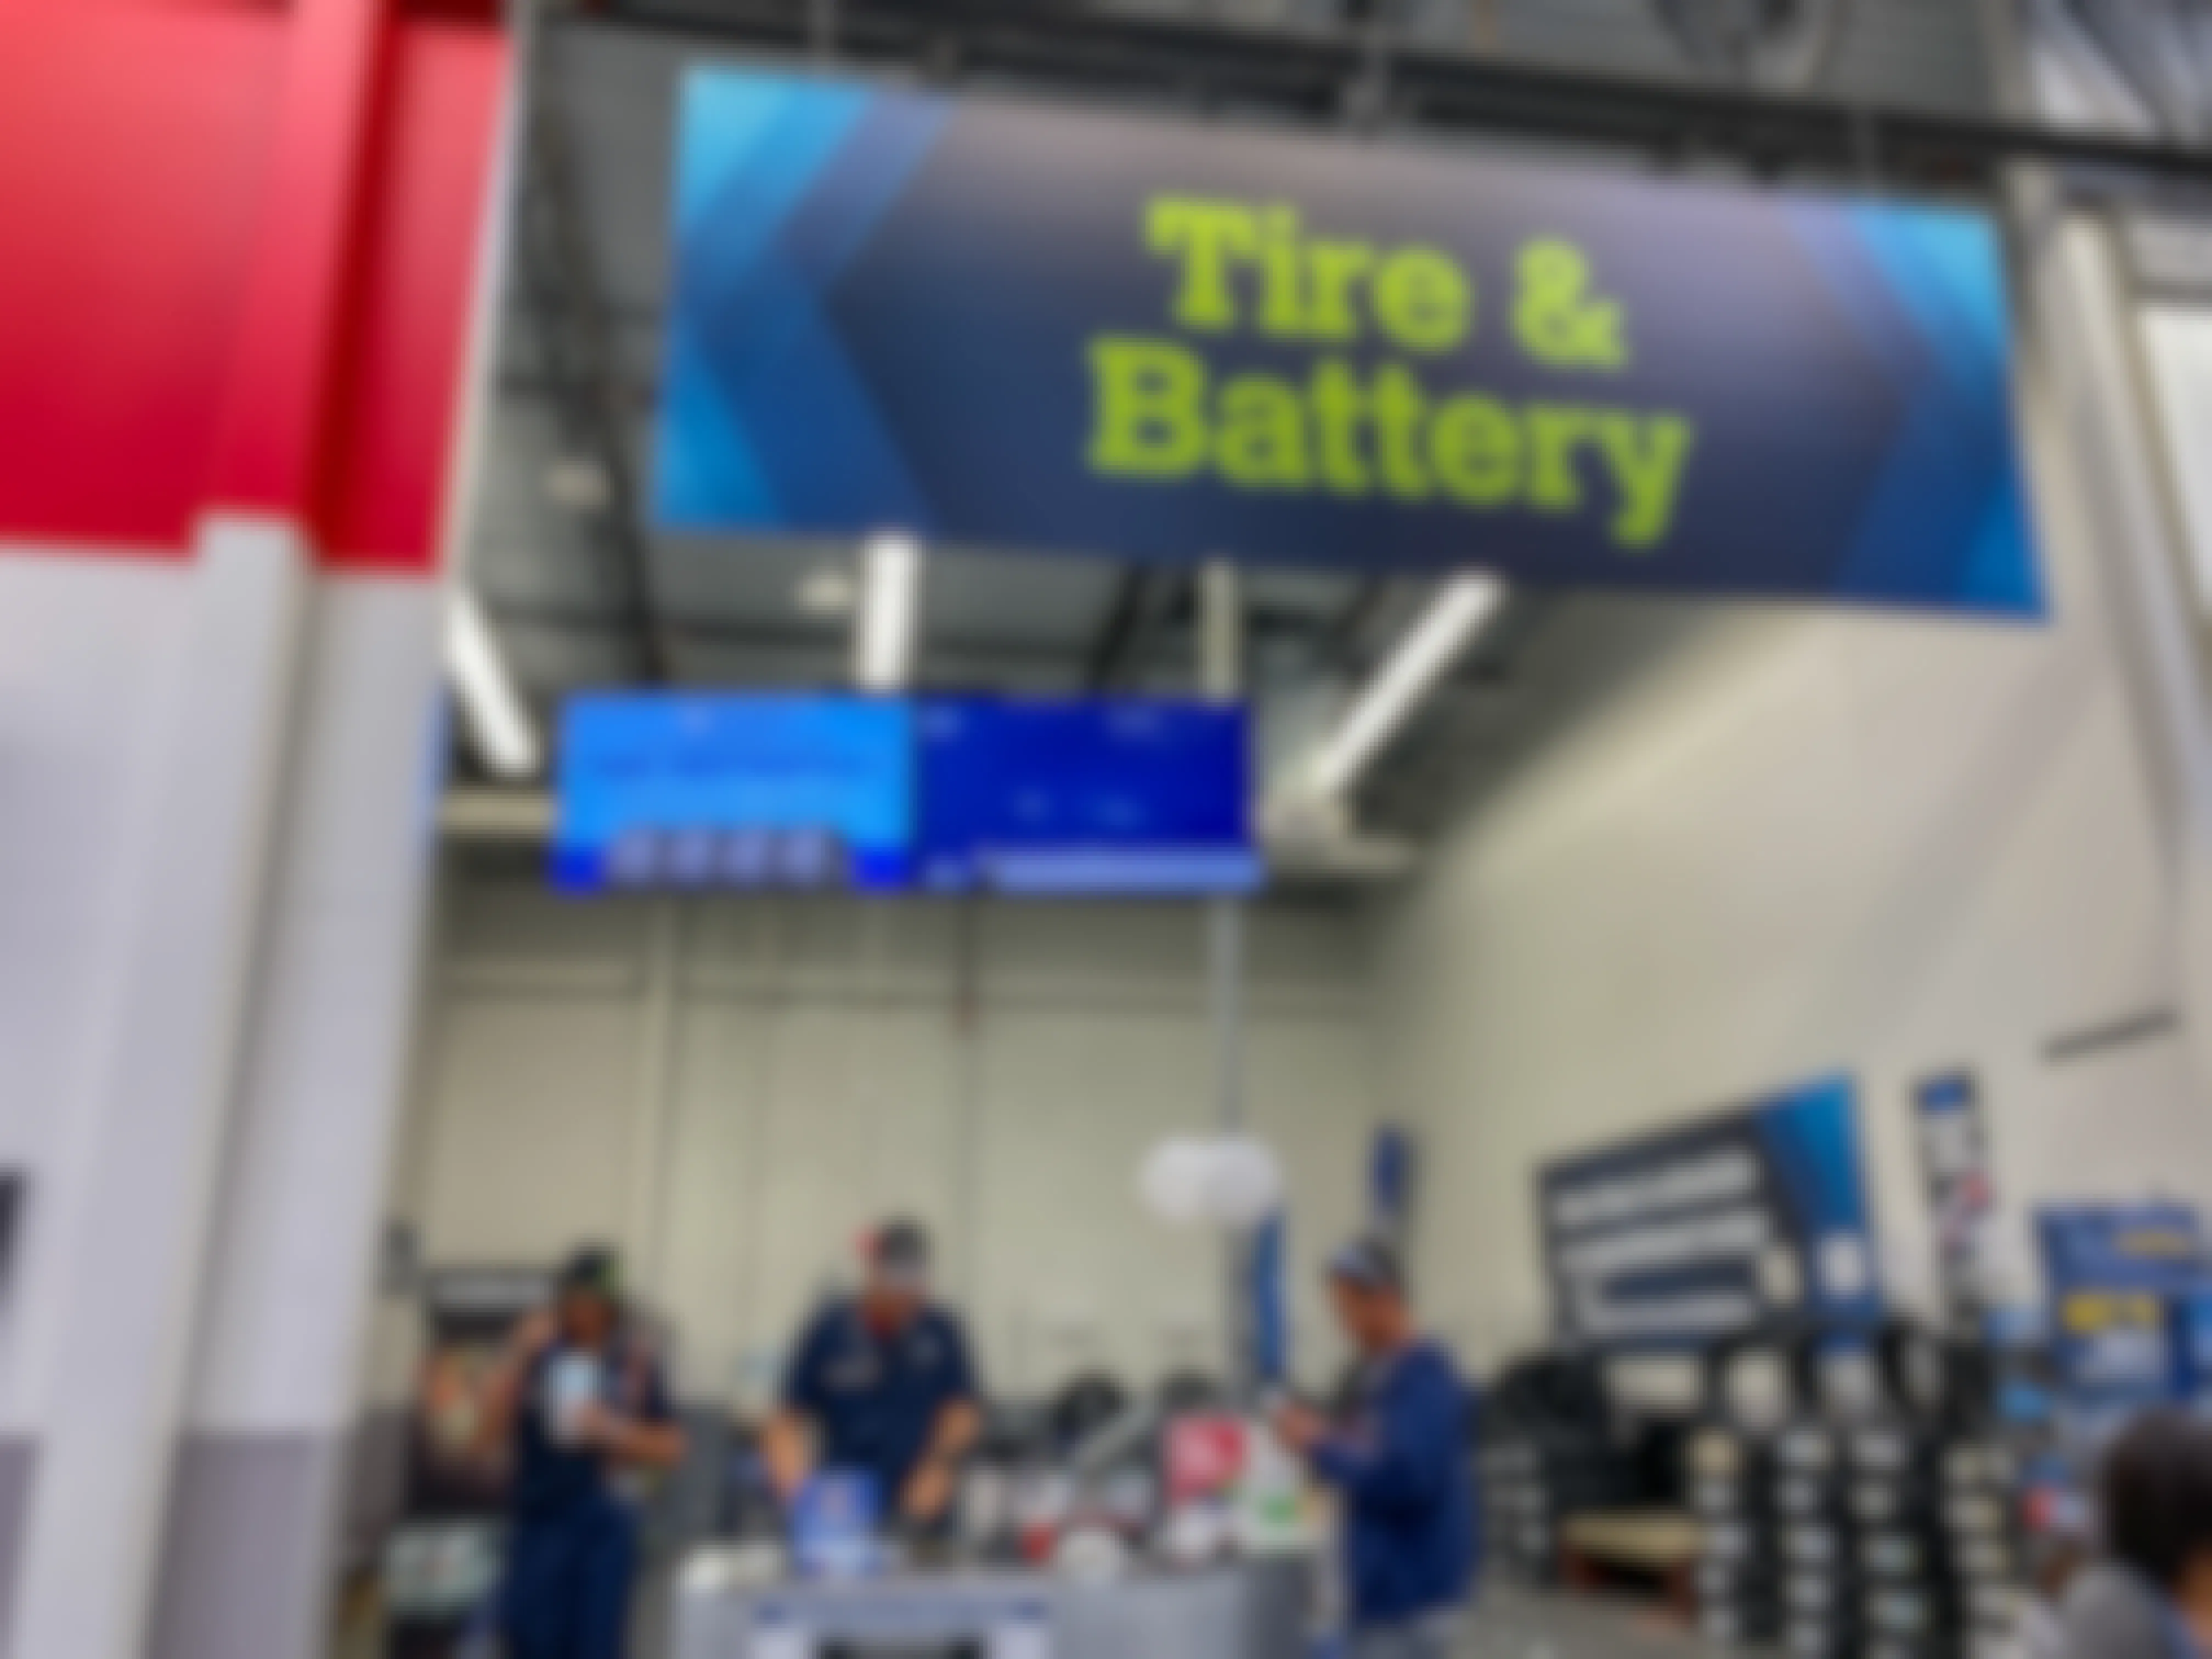 Sam's Club tire and battery center